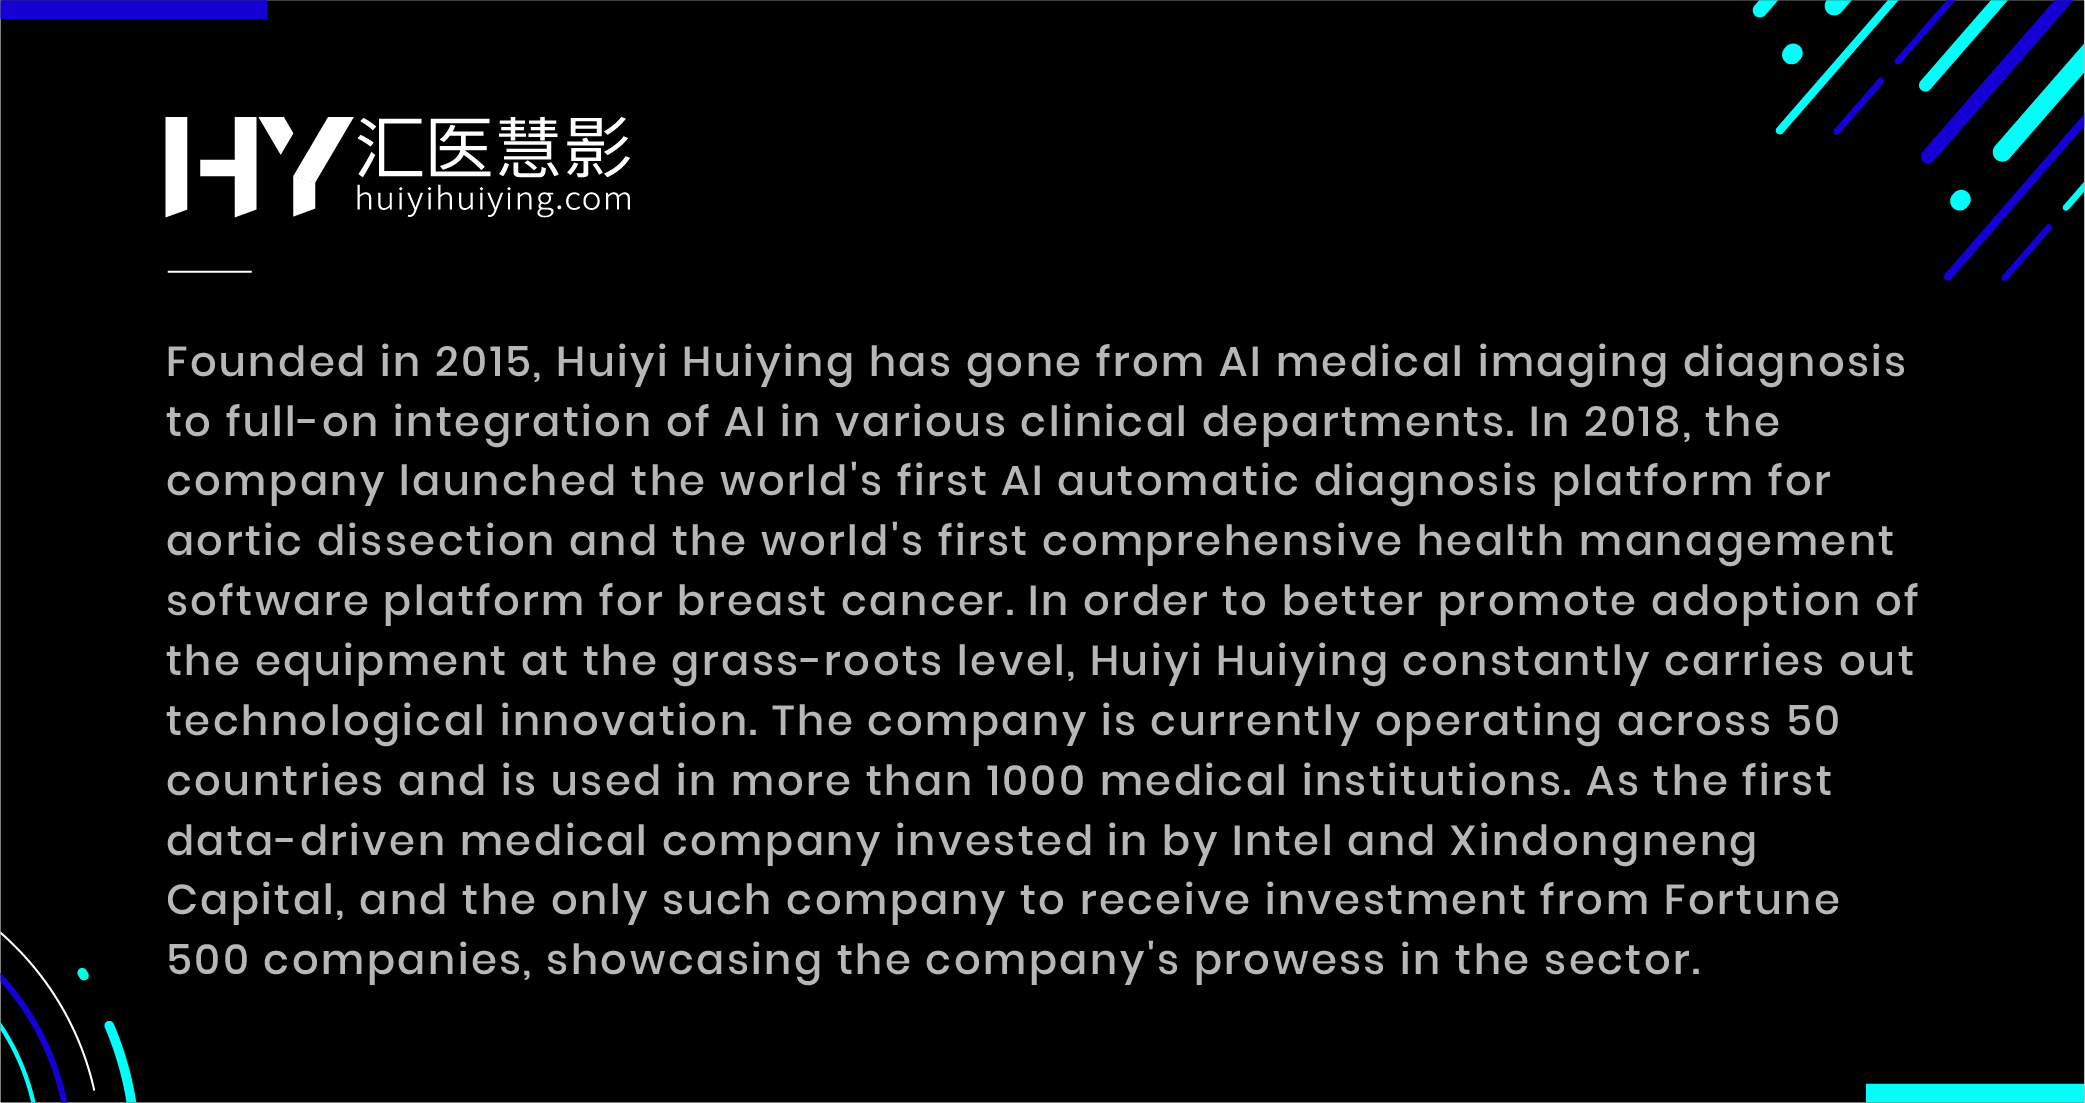 Huiyi huiying artificial intelligence medical imaging automatic diagnosis platform breast cancer health management invested intel